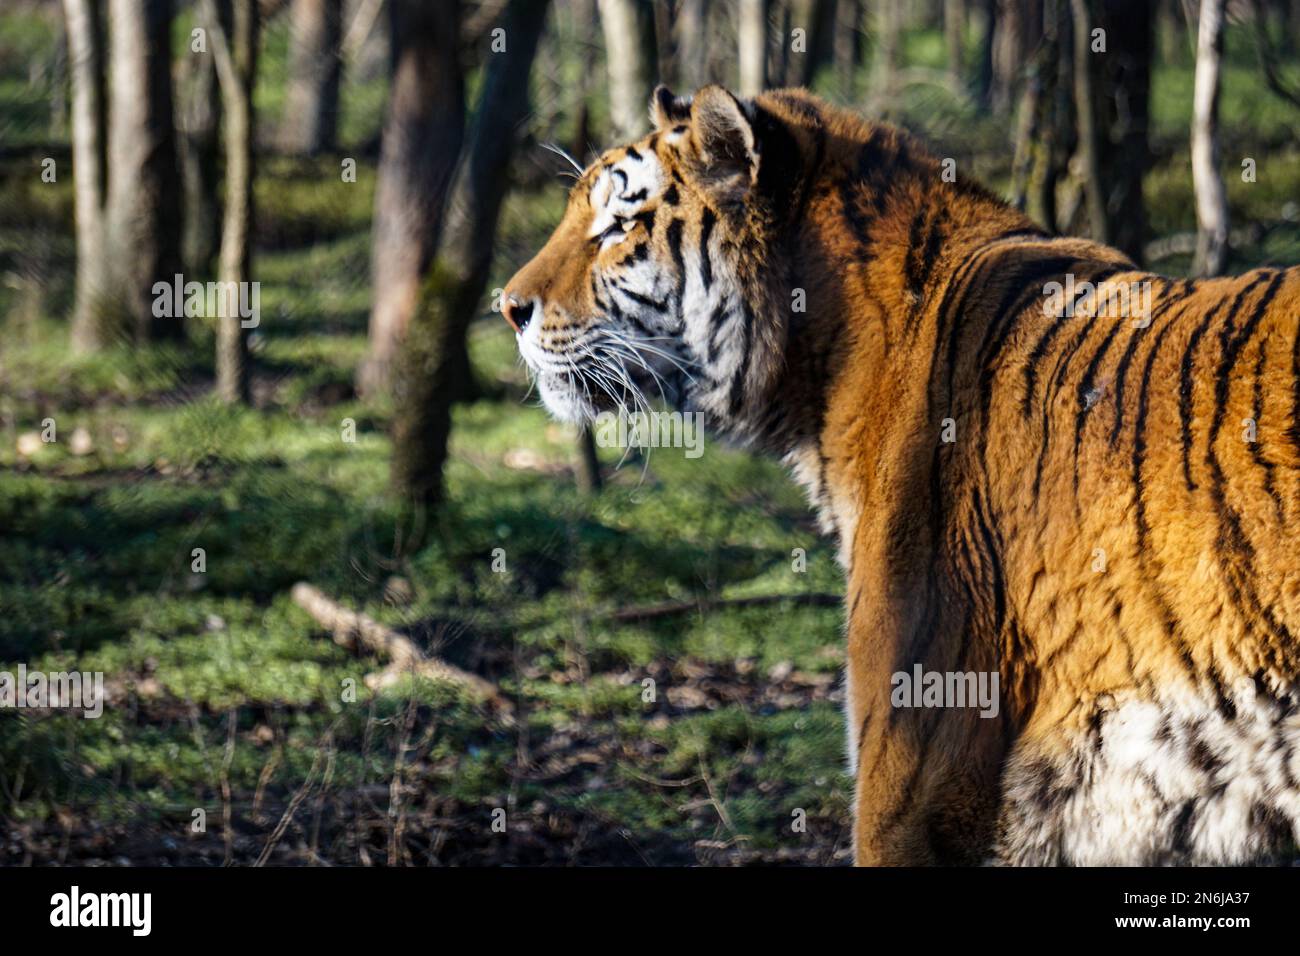 A selective focus shot of a Tiger lying on the ground surrounded by trees Stock Photo